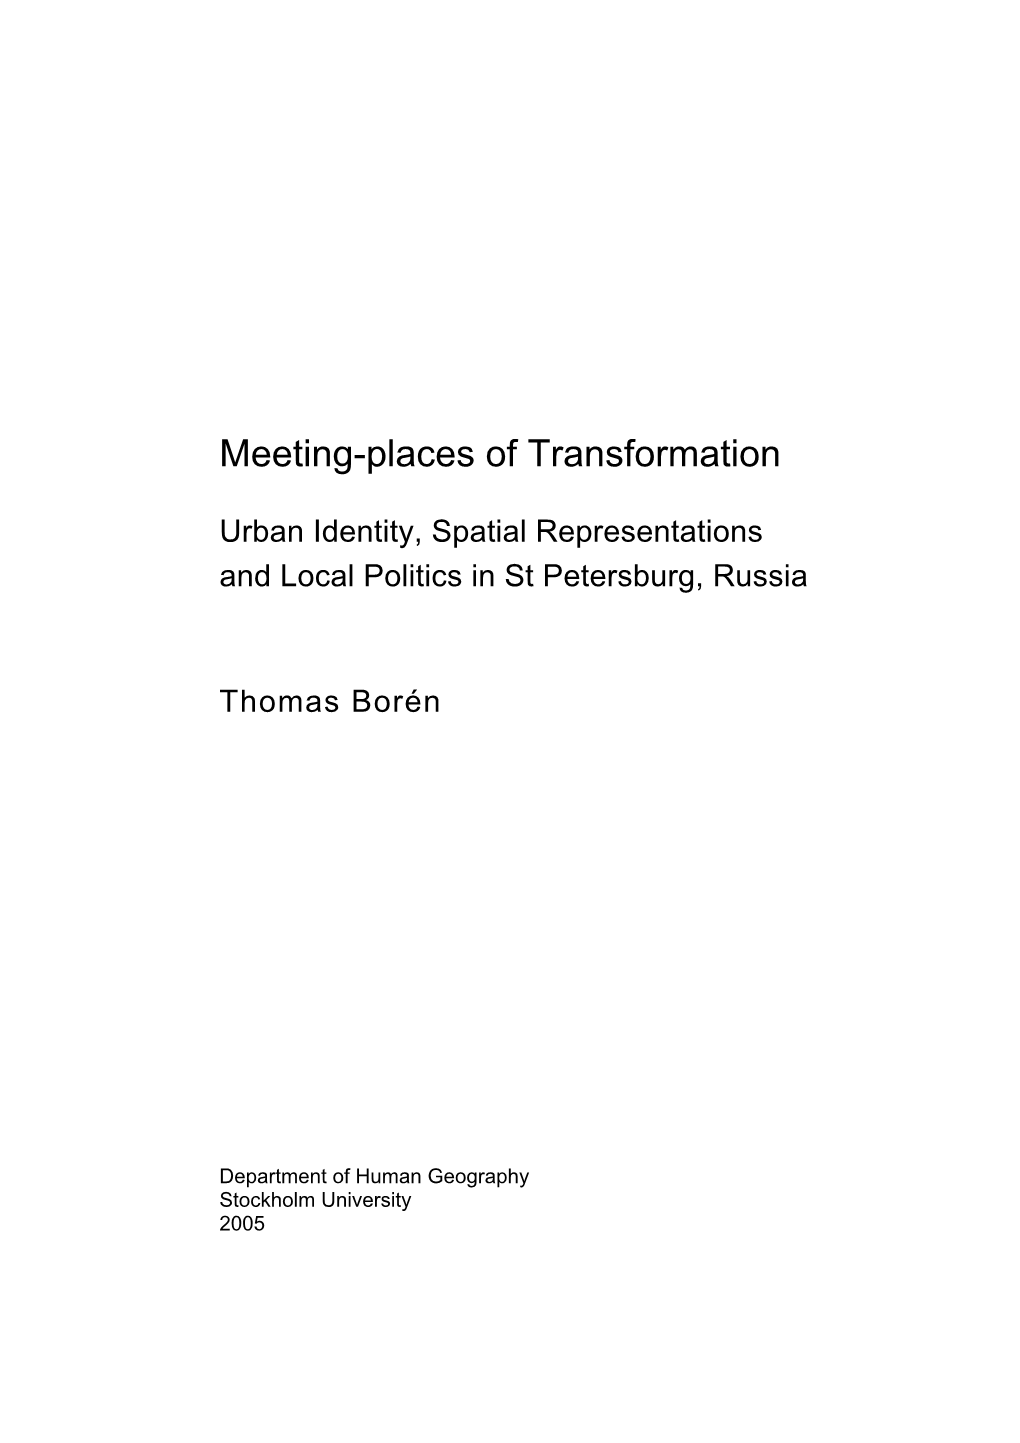 Meeting-Places of Transformation